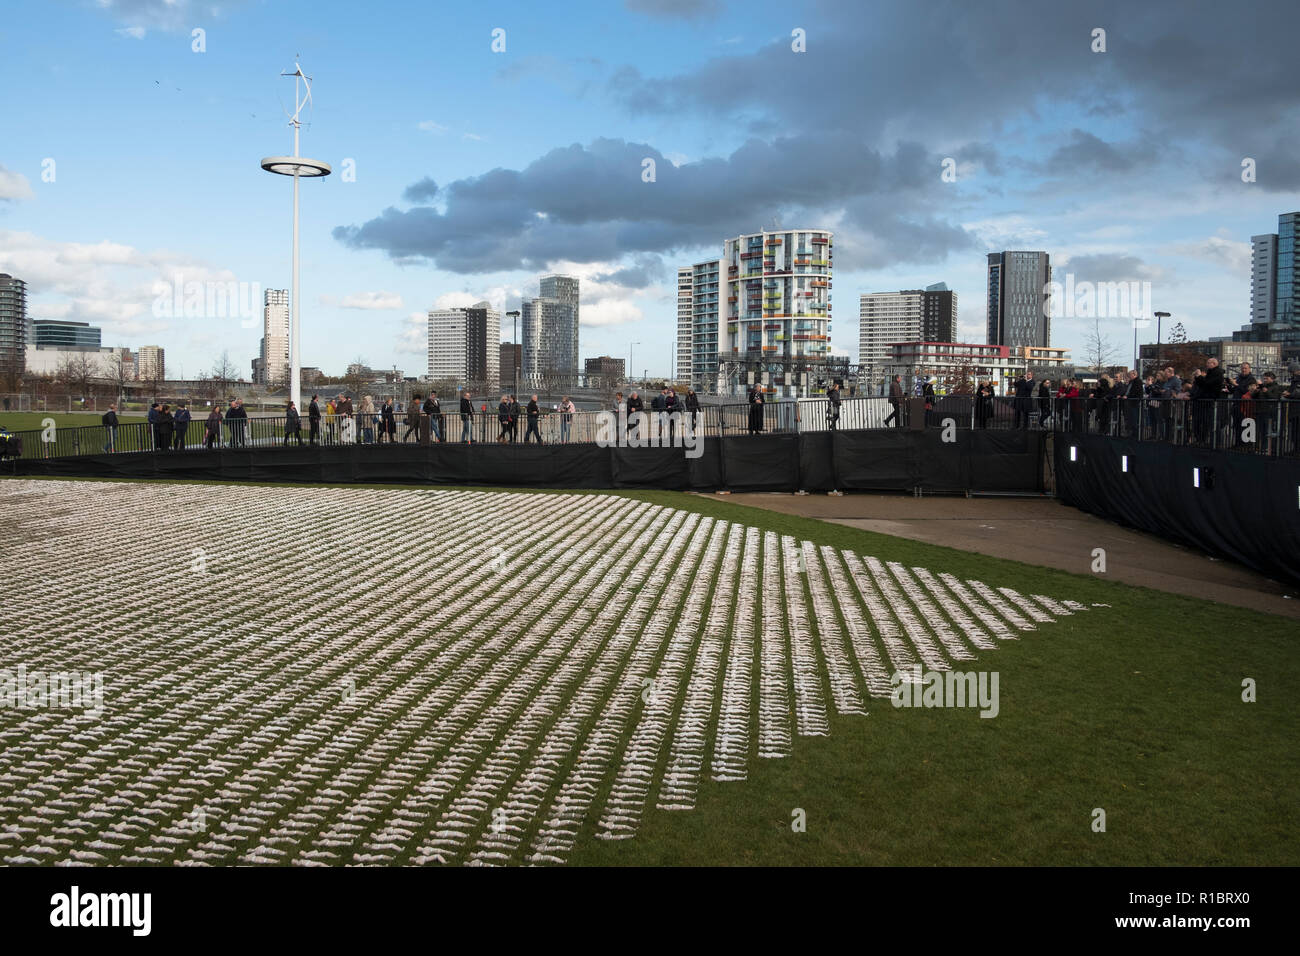 Stratford, London, UK. 11th November 2018. The Artist Rob Heard's installation representing the fallen soldiers from the First World War. Tens of thousands of shrouded figures  laid out at London's Olympic Park to mark the centenary of the end of World War One. Each handmade 12-inch model represents one of the 72,396 British Commonwealth serviceman killed at the Somme with no known grave.  In total, more than one million soldiers were killed or wounded during the 1916 Battle of the Somme.. Credit: Mike Abrahams/Alamy Live News Stock Photo